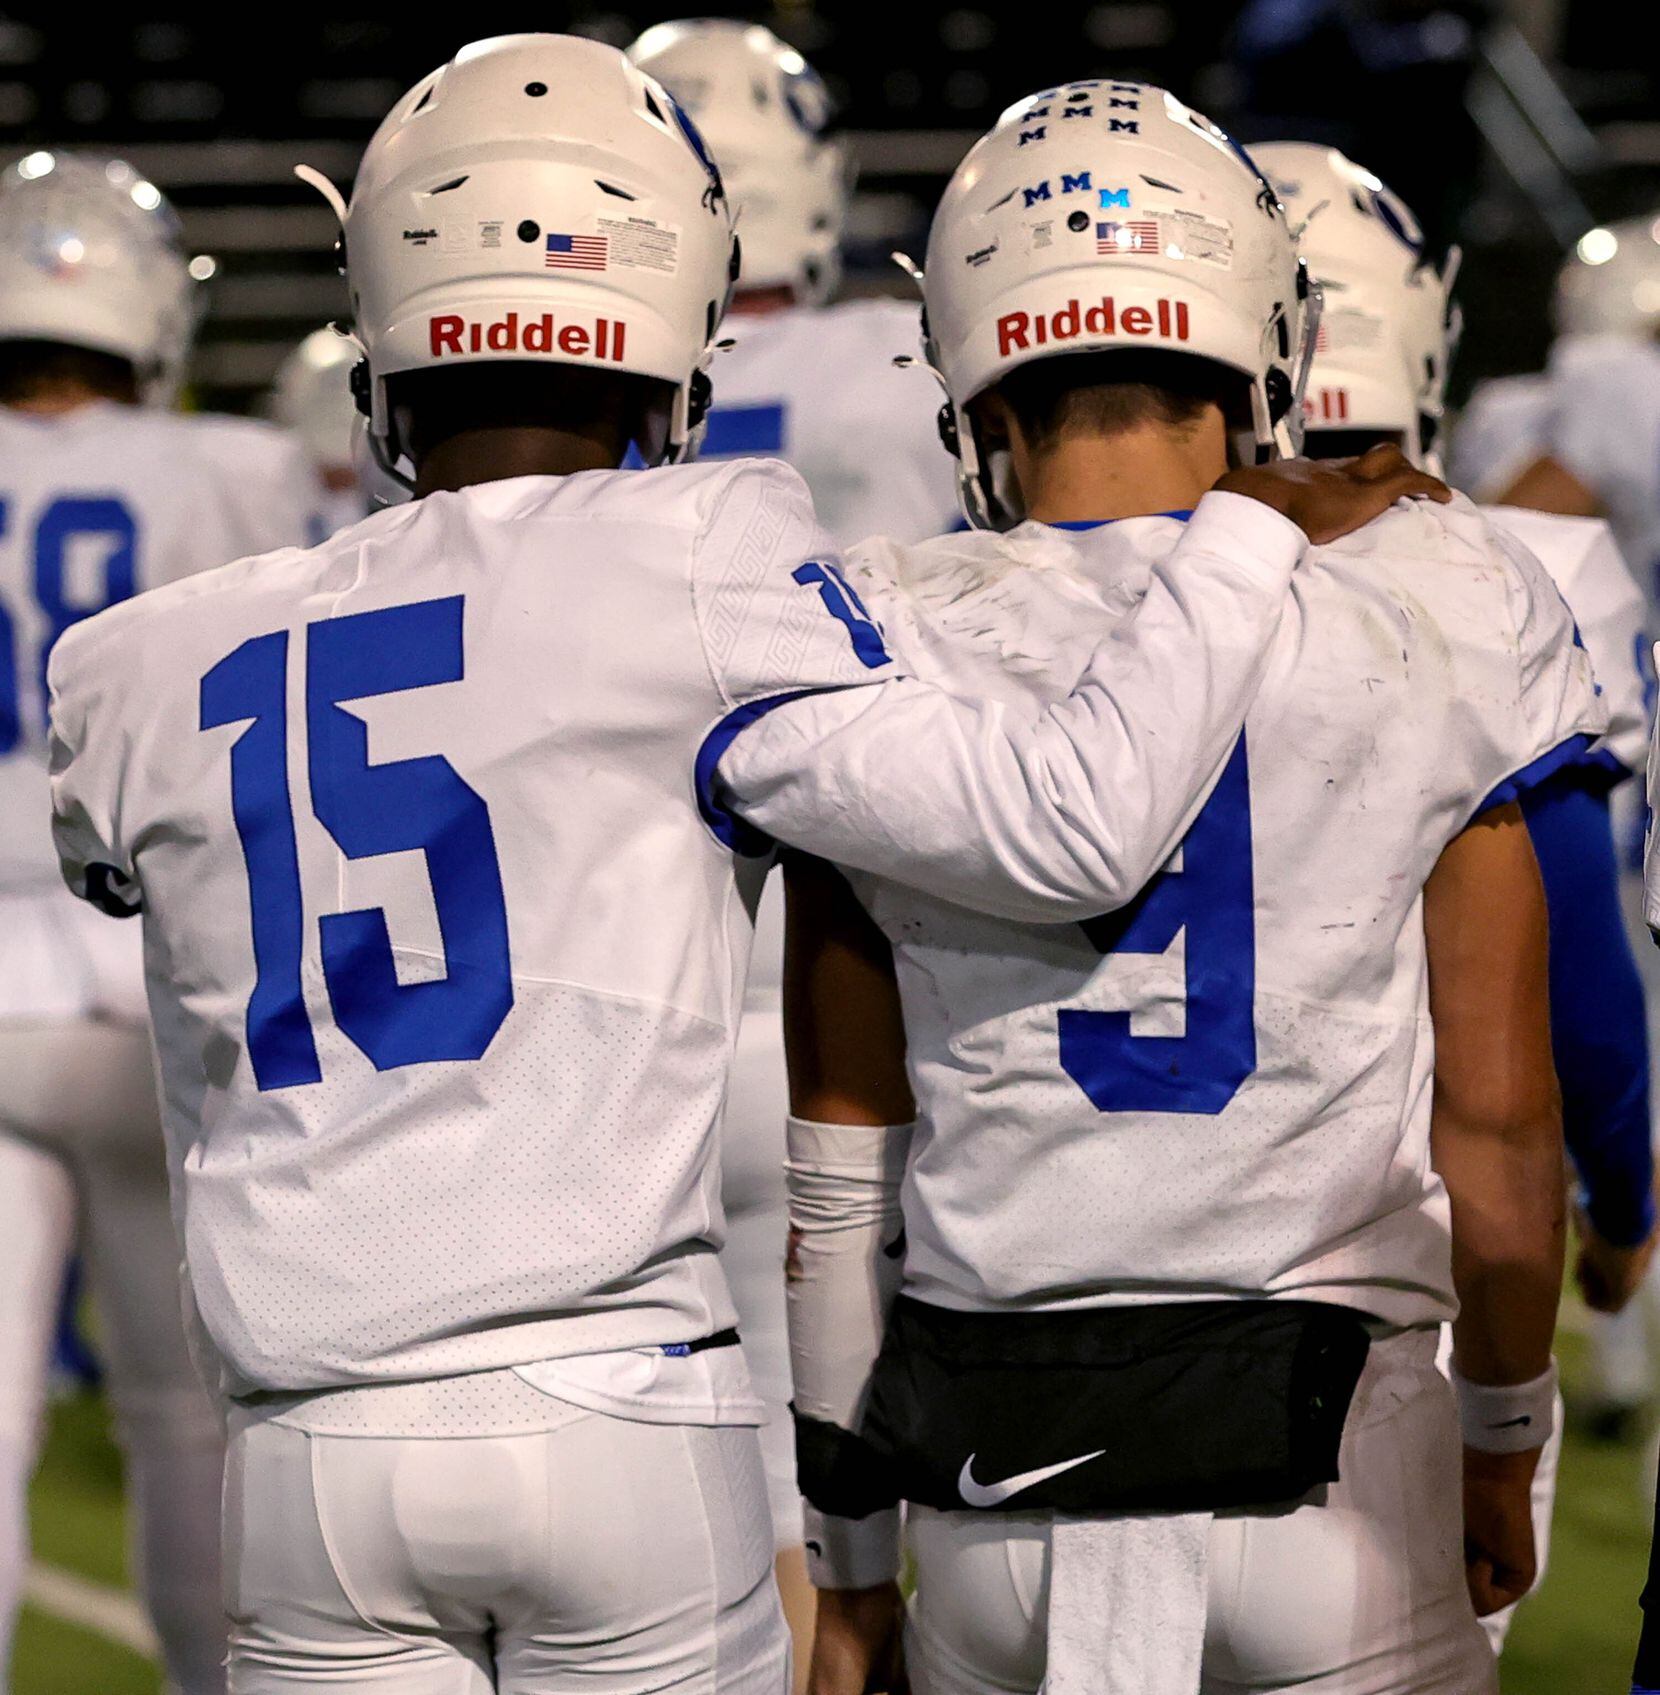 Midlothian quarterback Chad Ragle (9) and wide receiver Julius Cervera (15) walk off the field after losing to Mansfield Summit, 28-20 in the 5A Division I Region I semifinal high school football playoff game played on November 26, 2021 at Gopher-Warrior Bowl in Grand Prairie.  (Steve Nurenberg/Special Contributor)